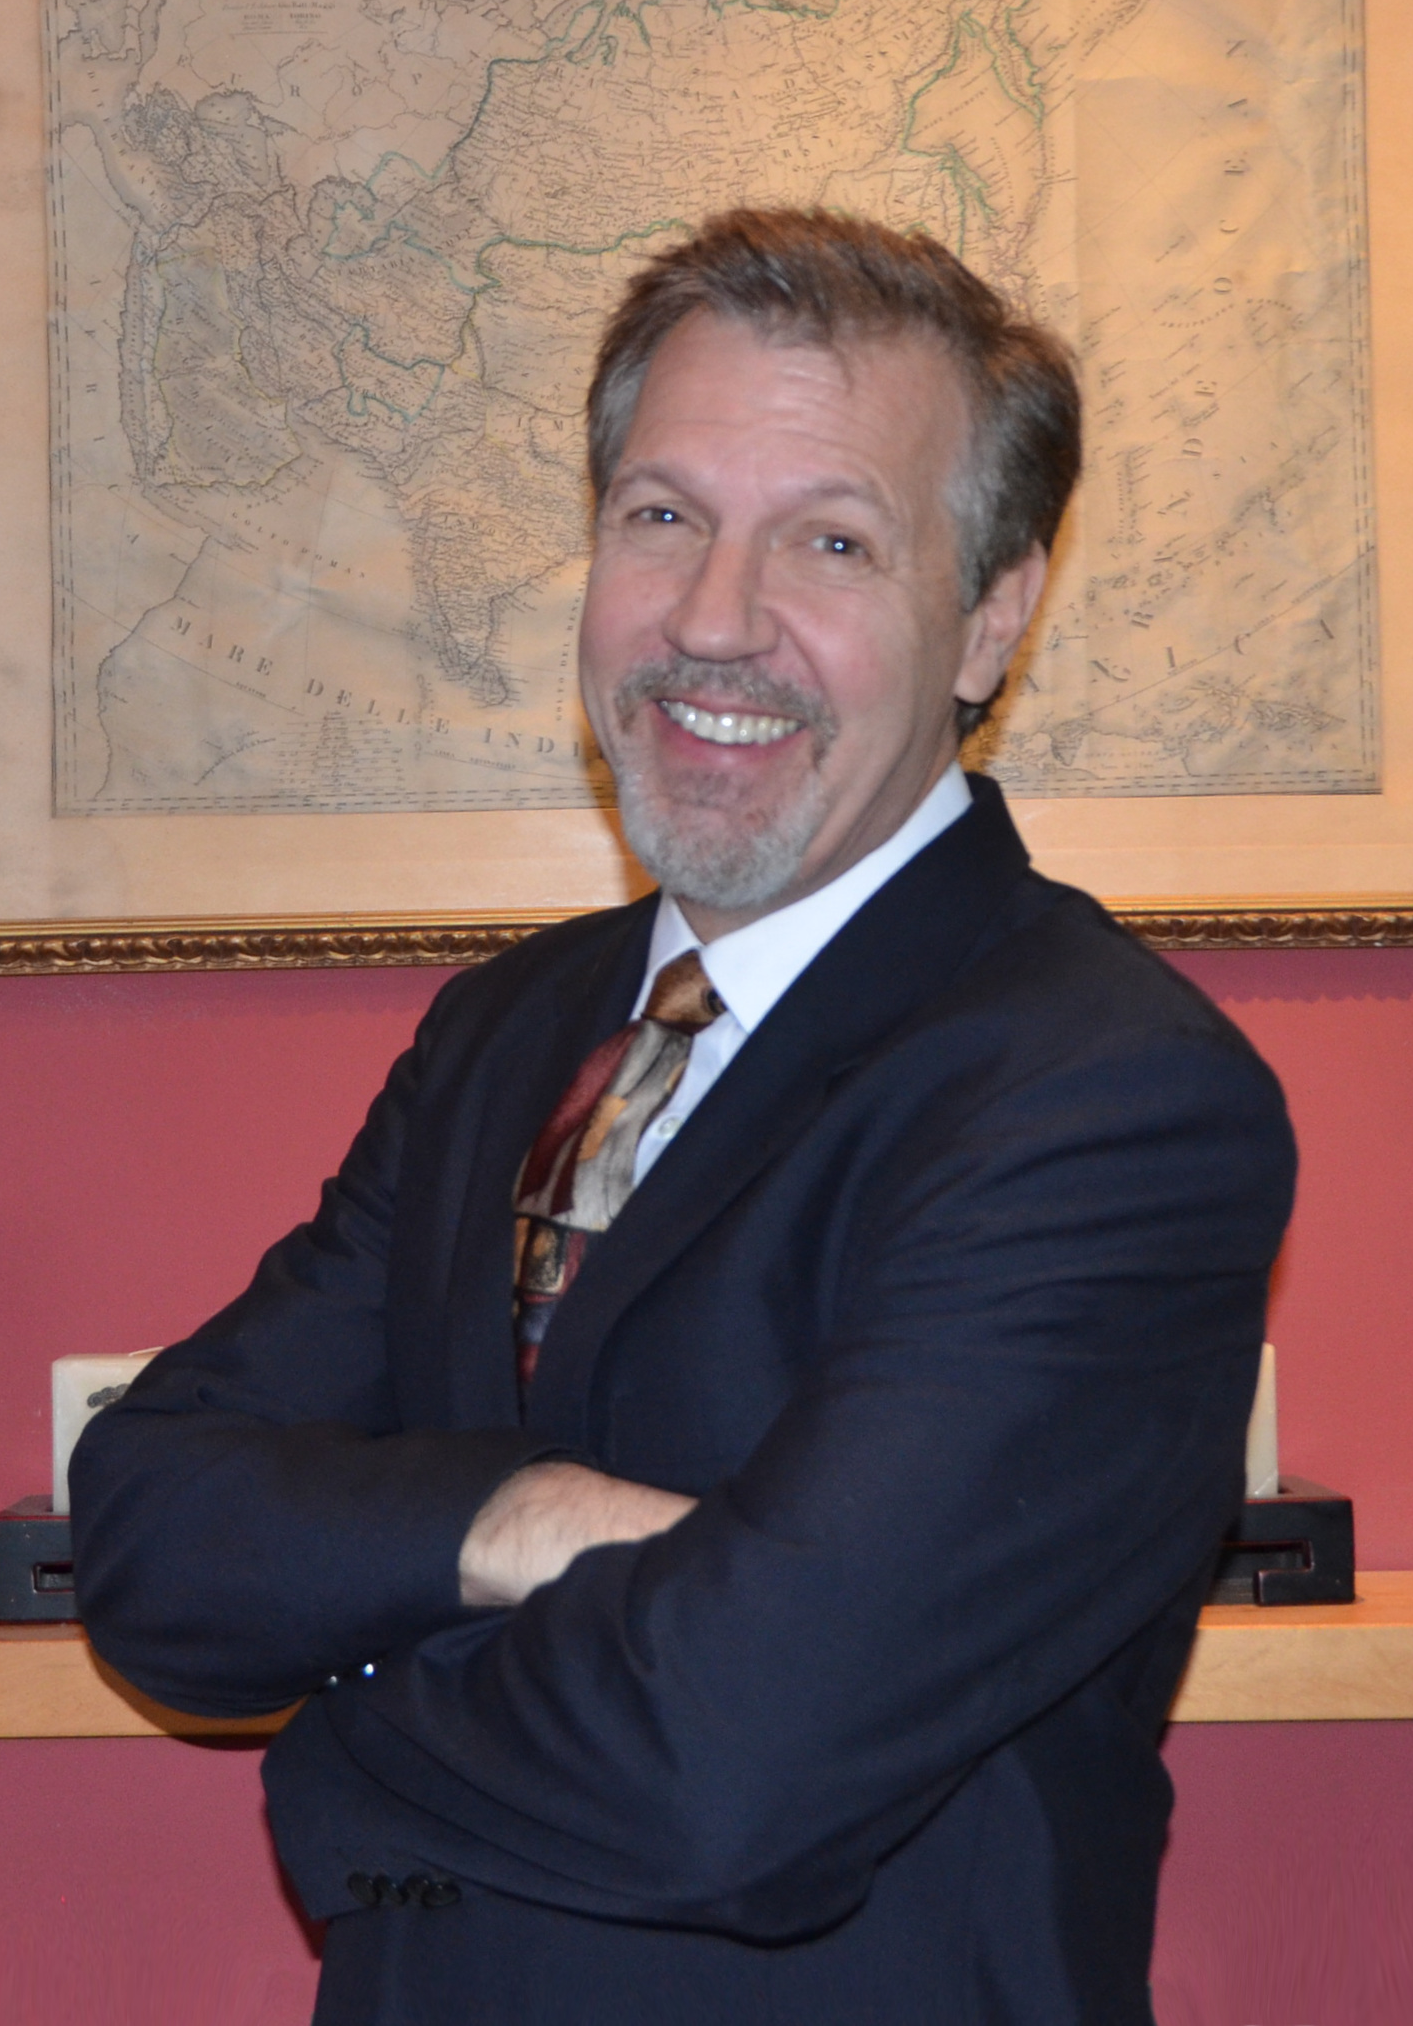 Headshot of Drew Kittel wearing a blue suit and striped necktie and standing in front of an old map of china.